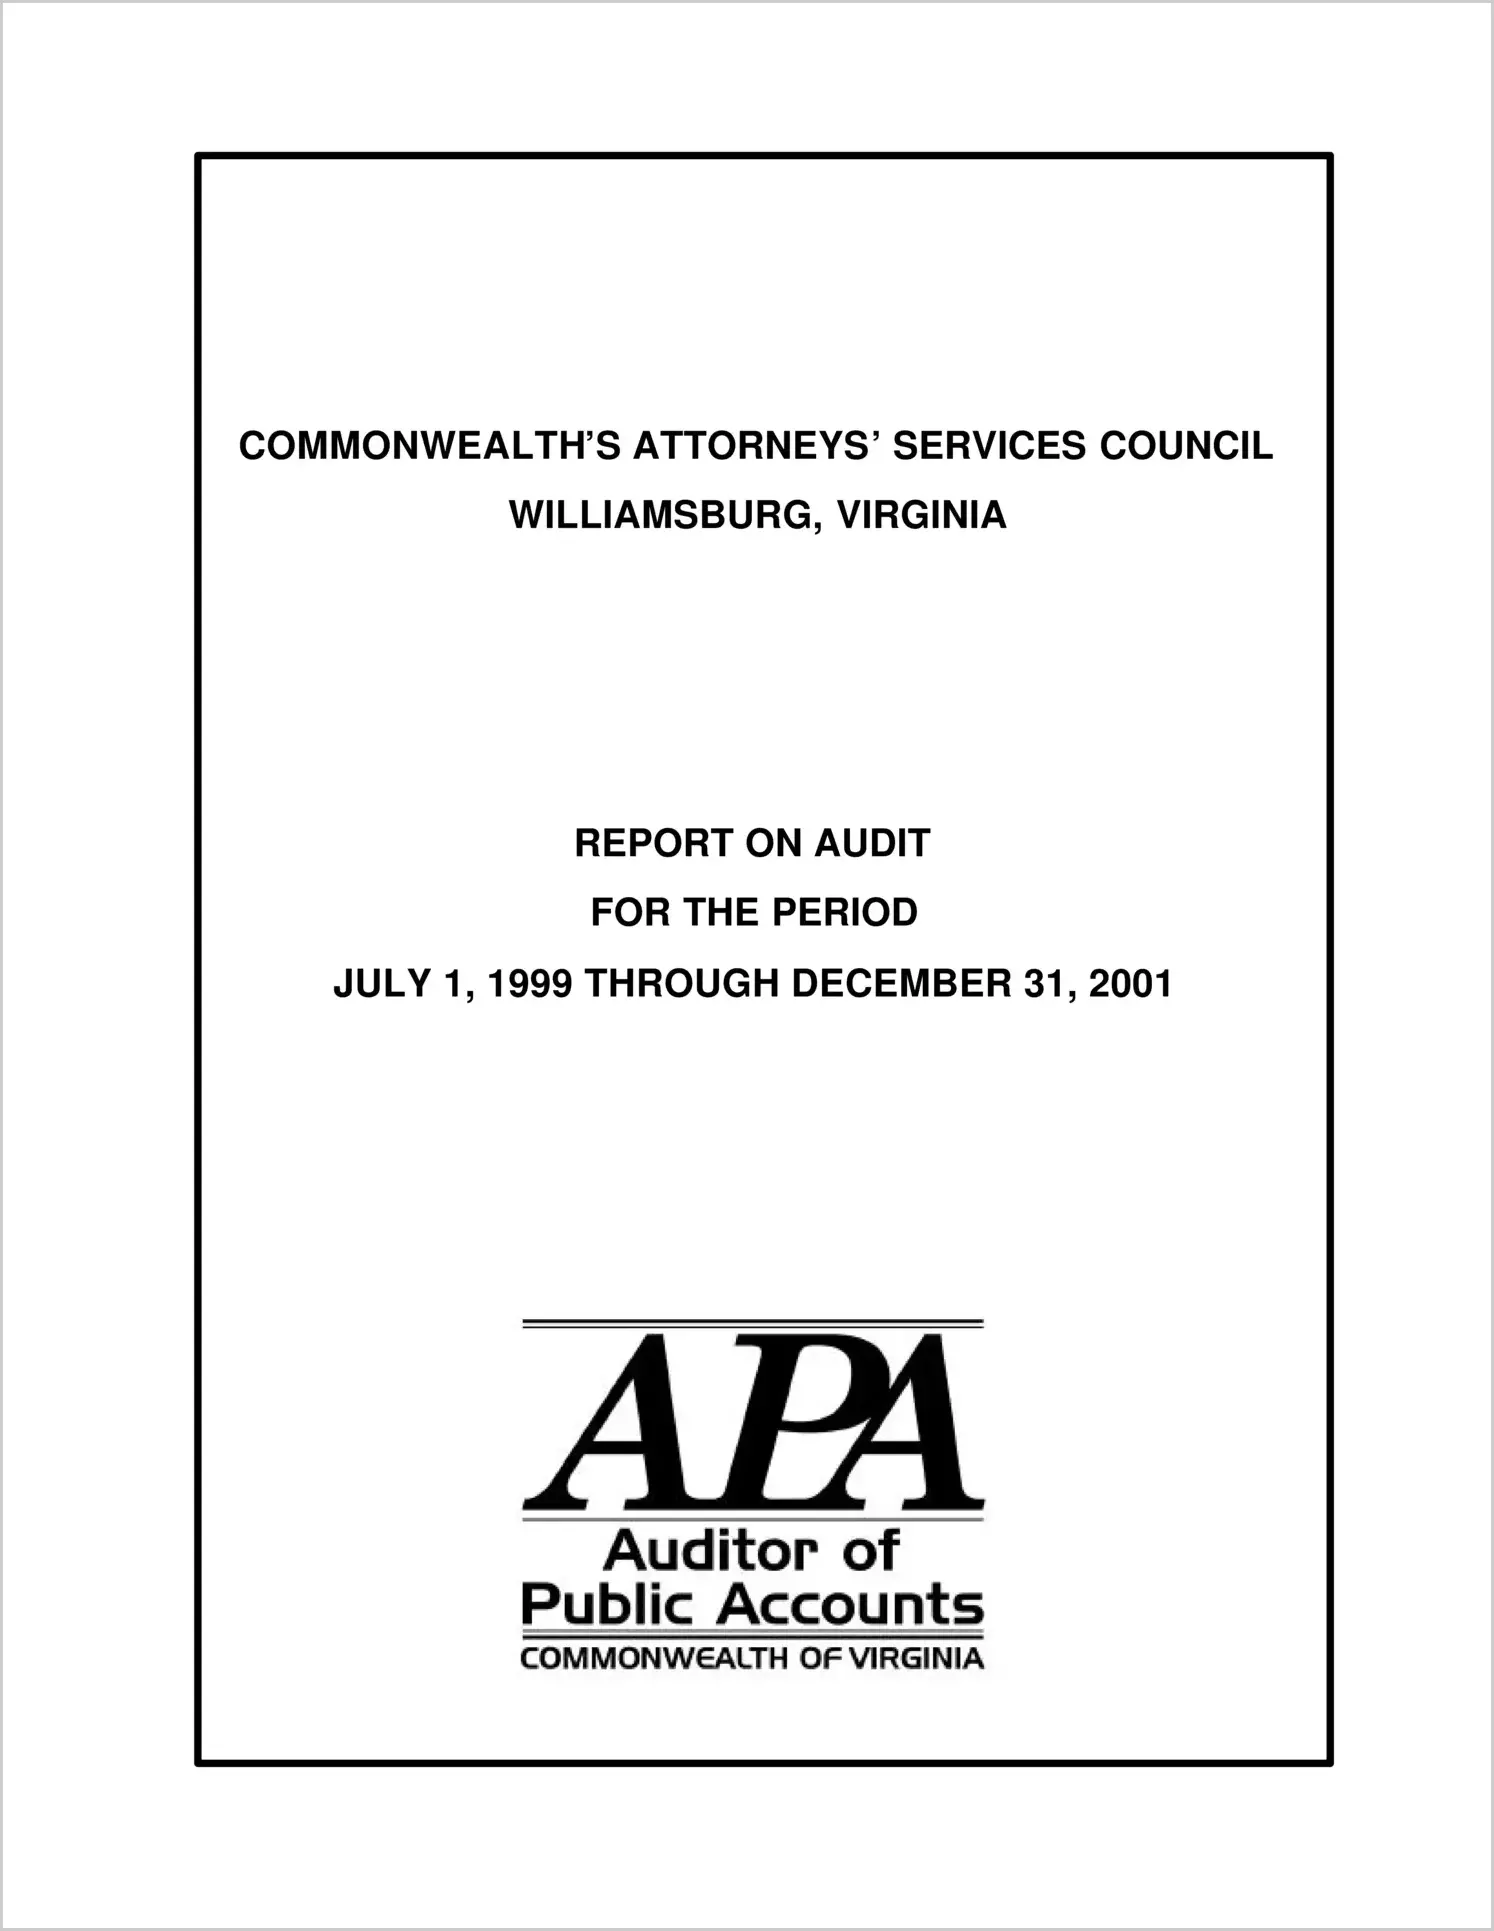 Commonwealth Attorneys` Services Council for the period July 1, 1999 through December 31, 2001